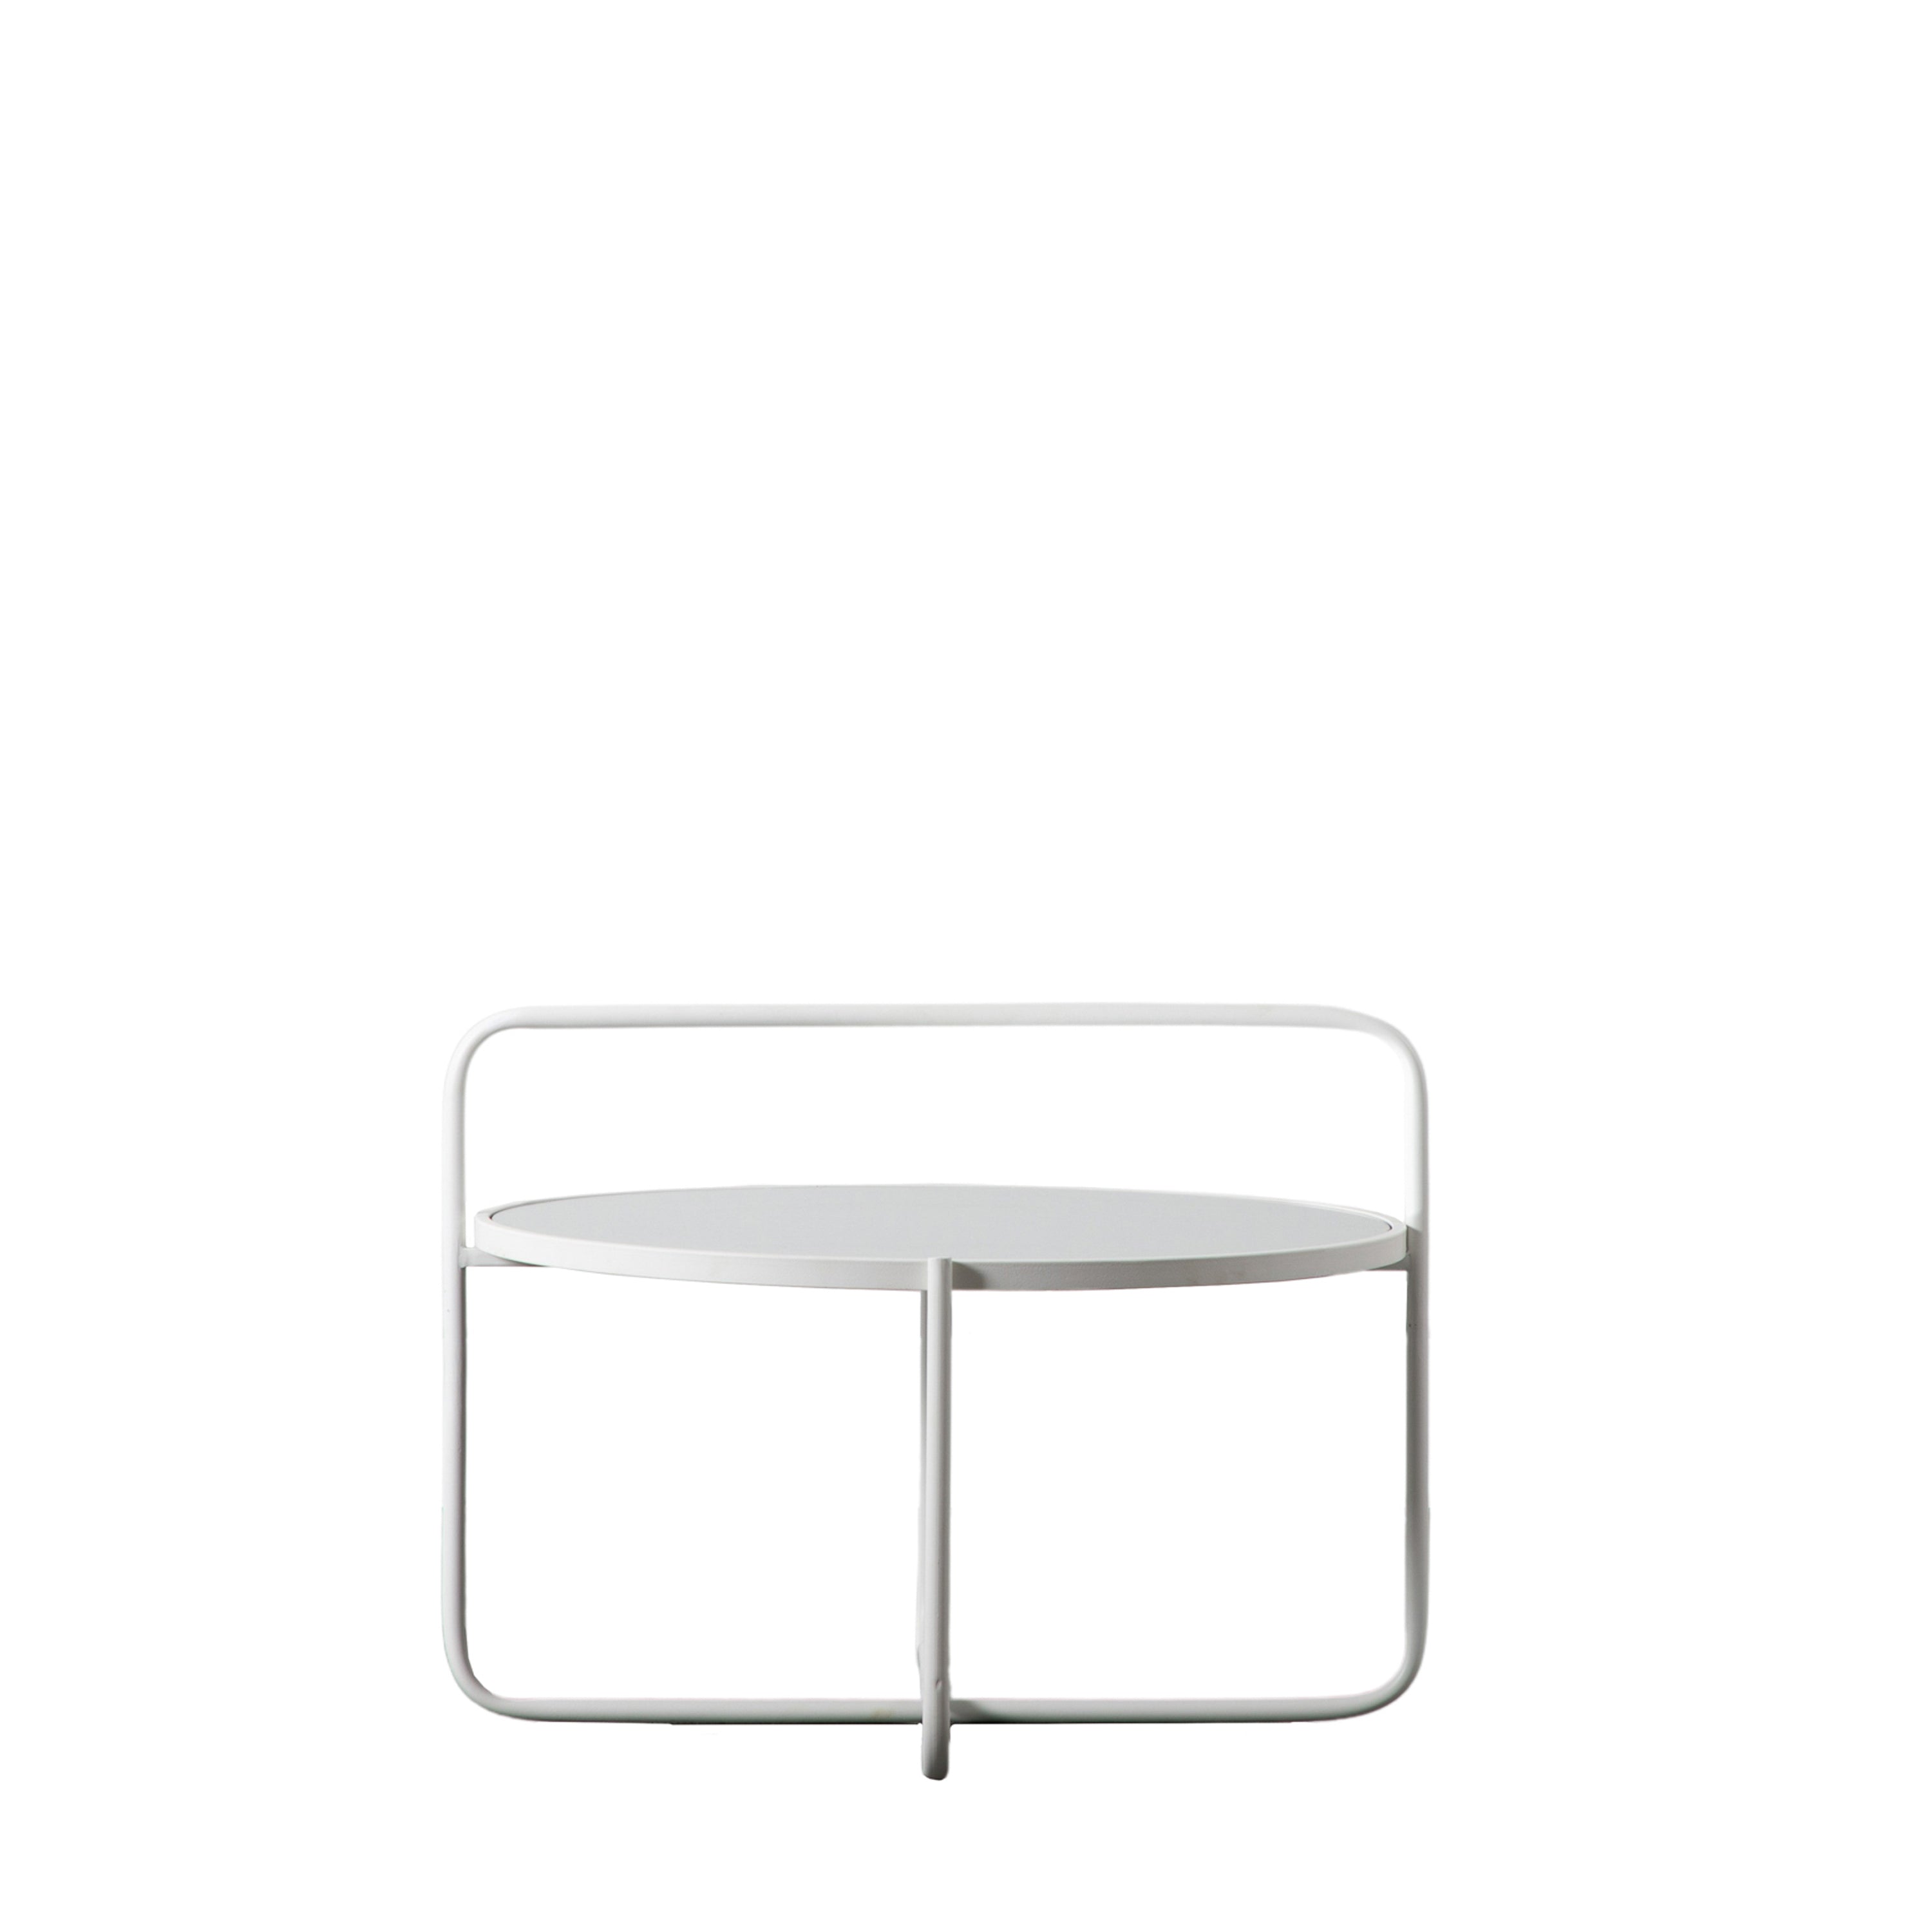 Cawley Coffee Table White